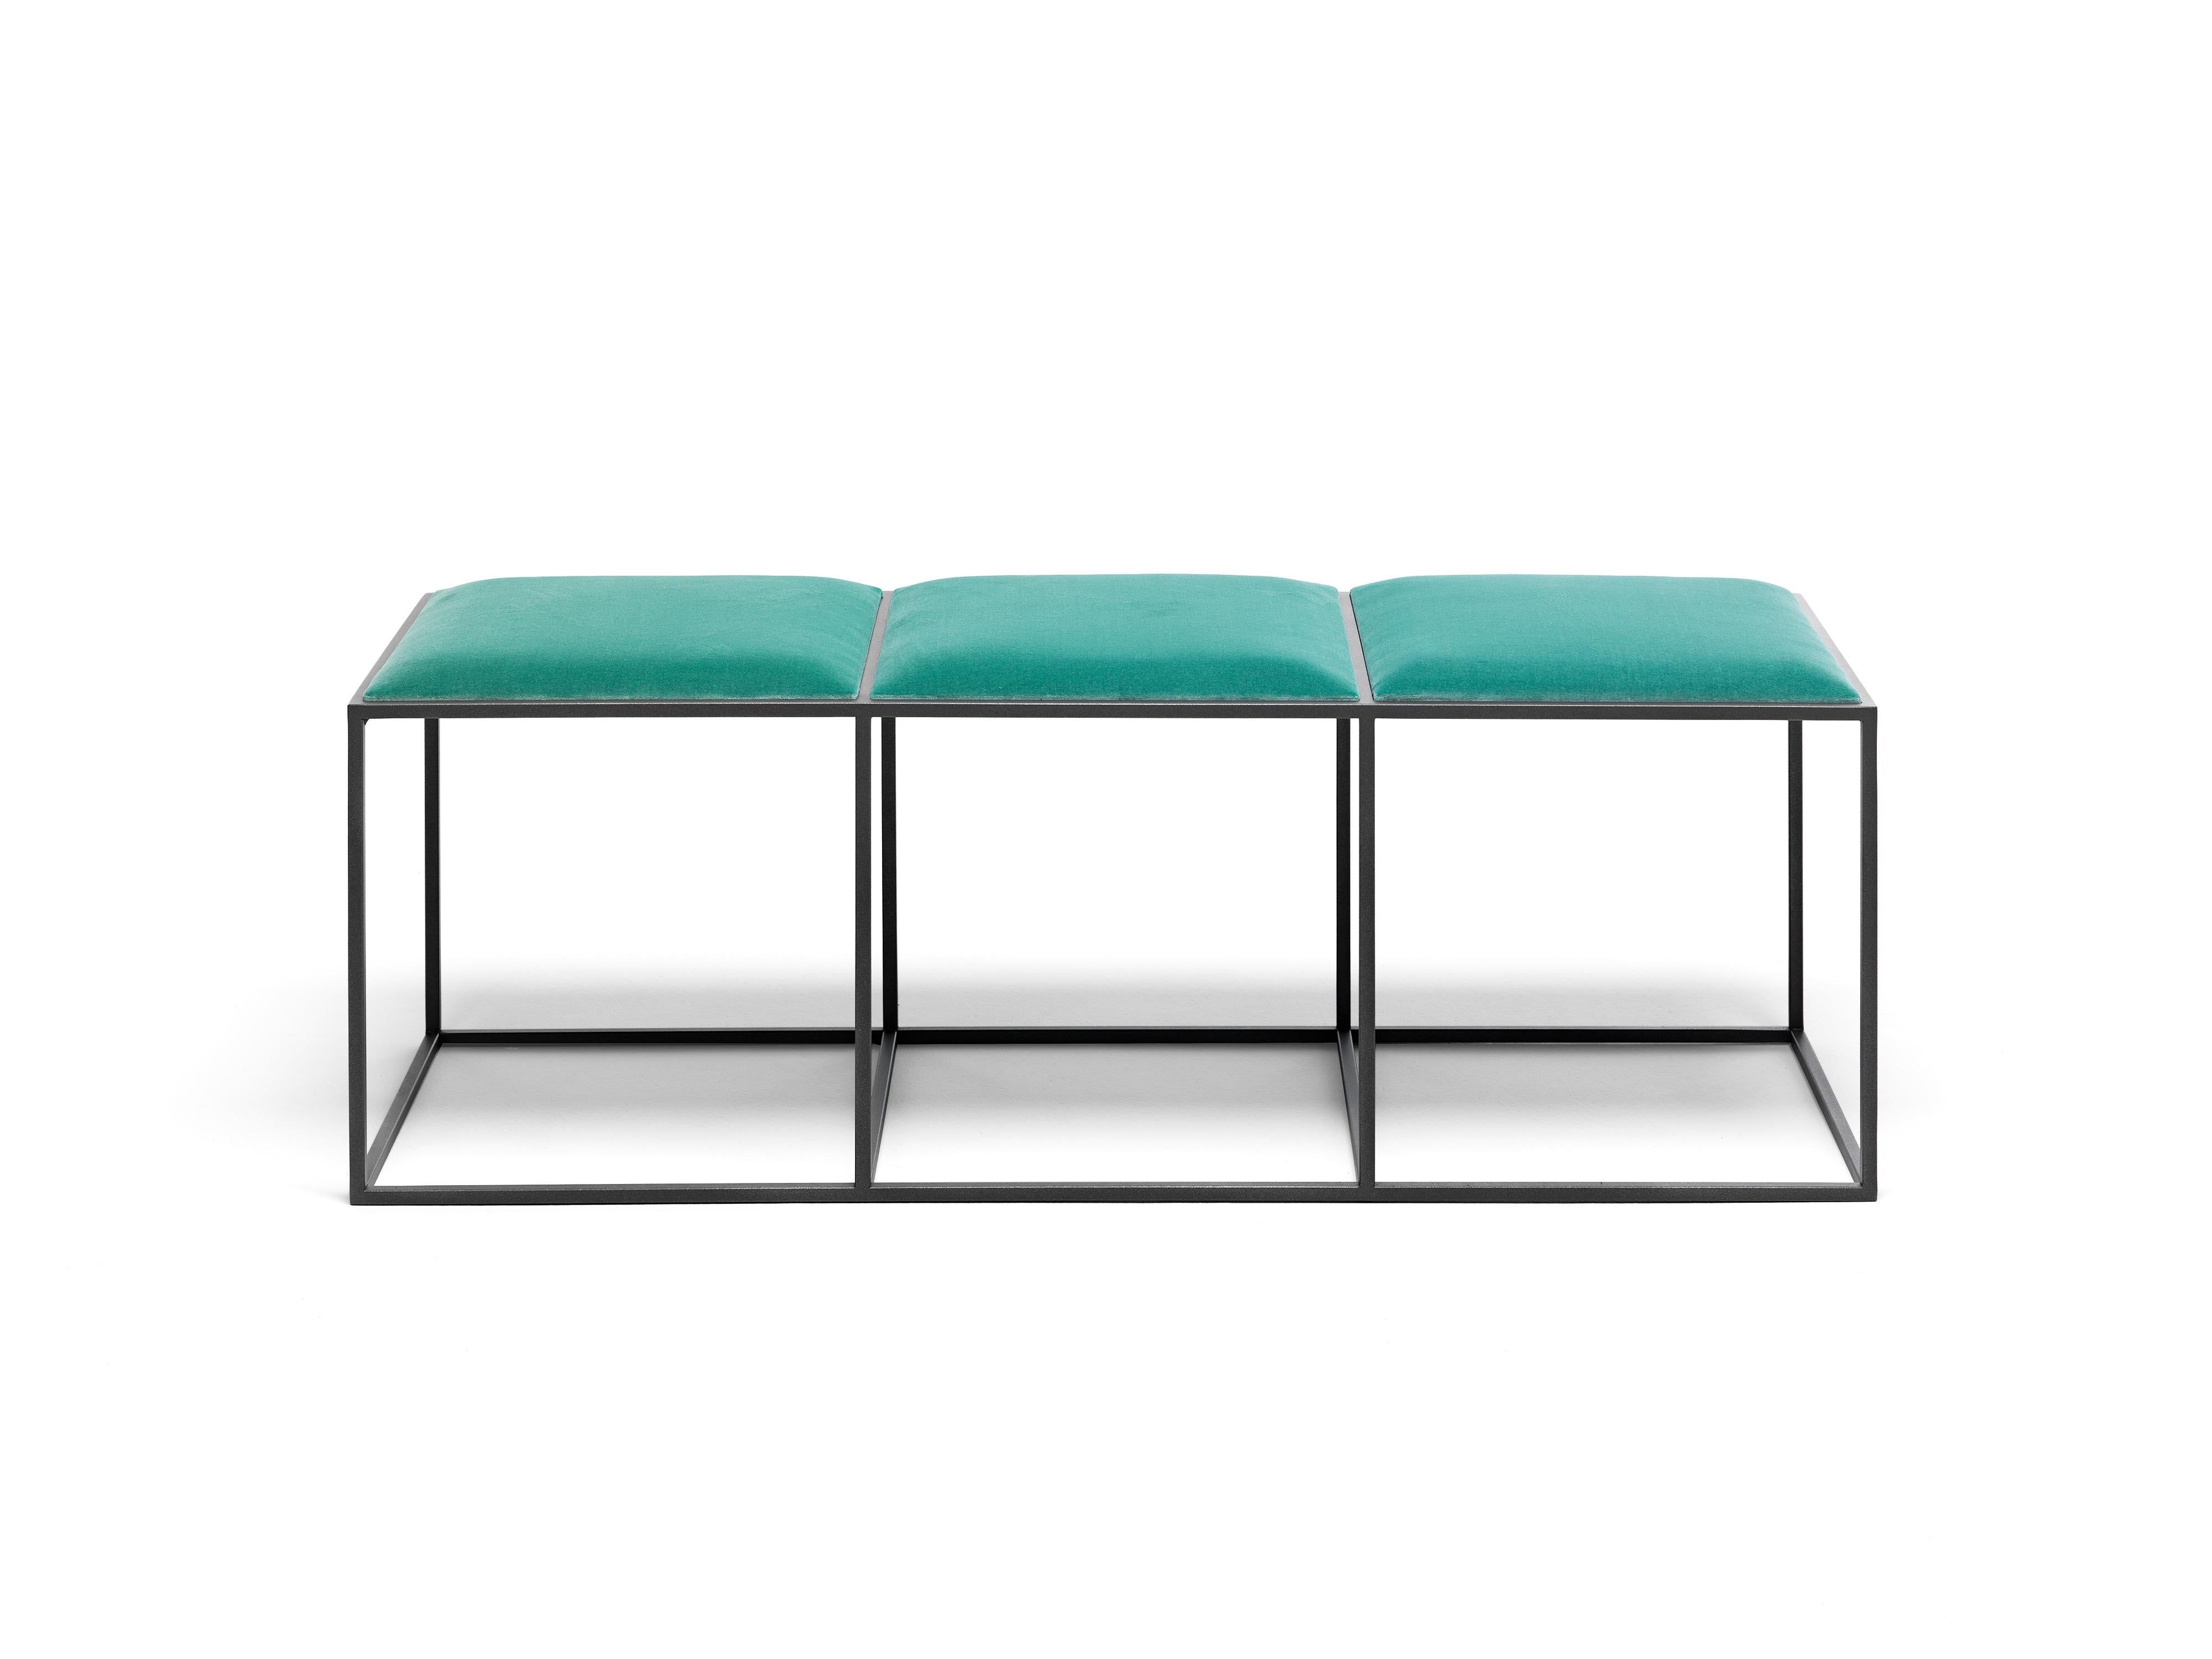 A small bench, simple, compact and extremely light, designed to be placed at the end of the bed but versatile enough to go anywhere. The base is made with a very thin squared metal tubing which results in physically and visually light and clean